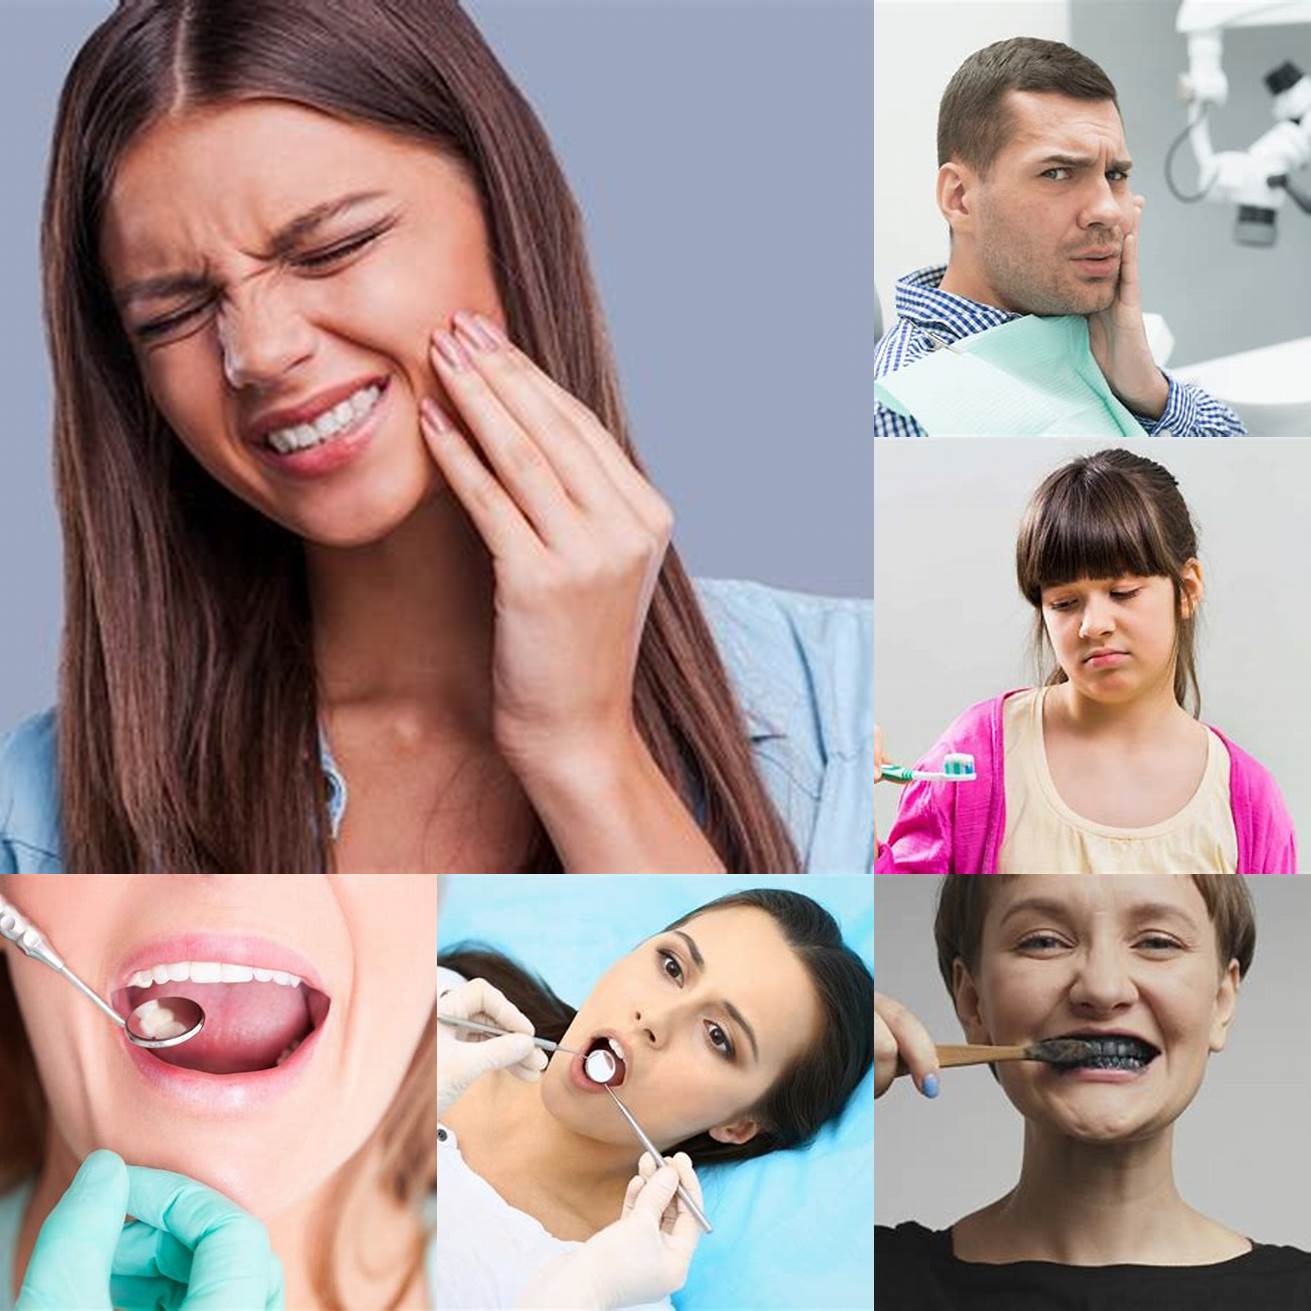 Dental Problems Poor dental hygiene can lead to a buildup of bacteria in the mouth which can cause black spots to appear on the tongue